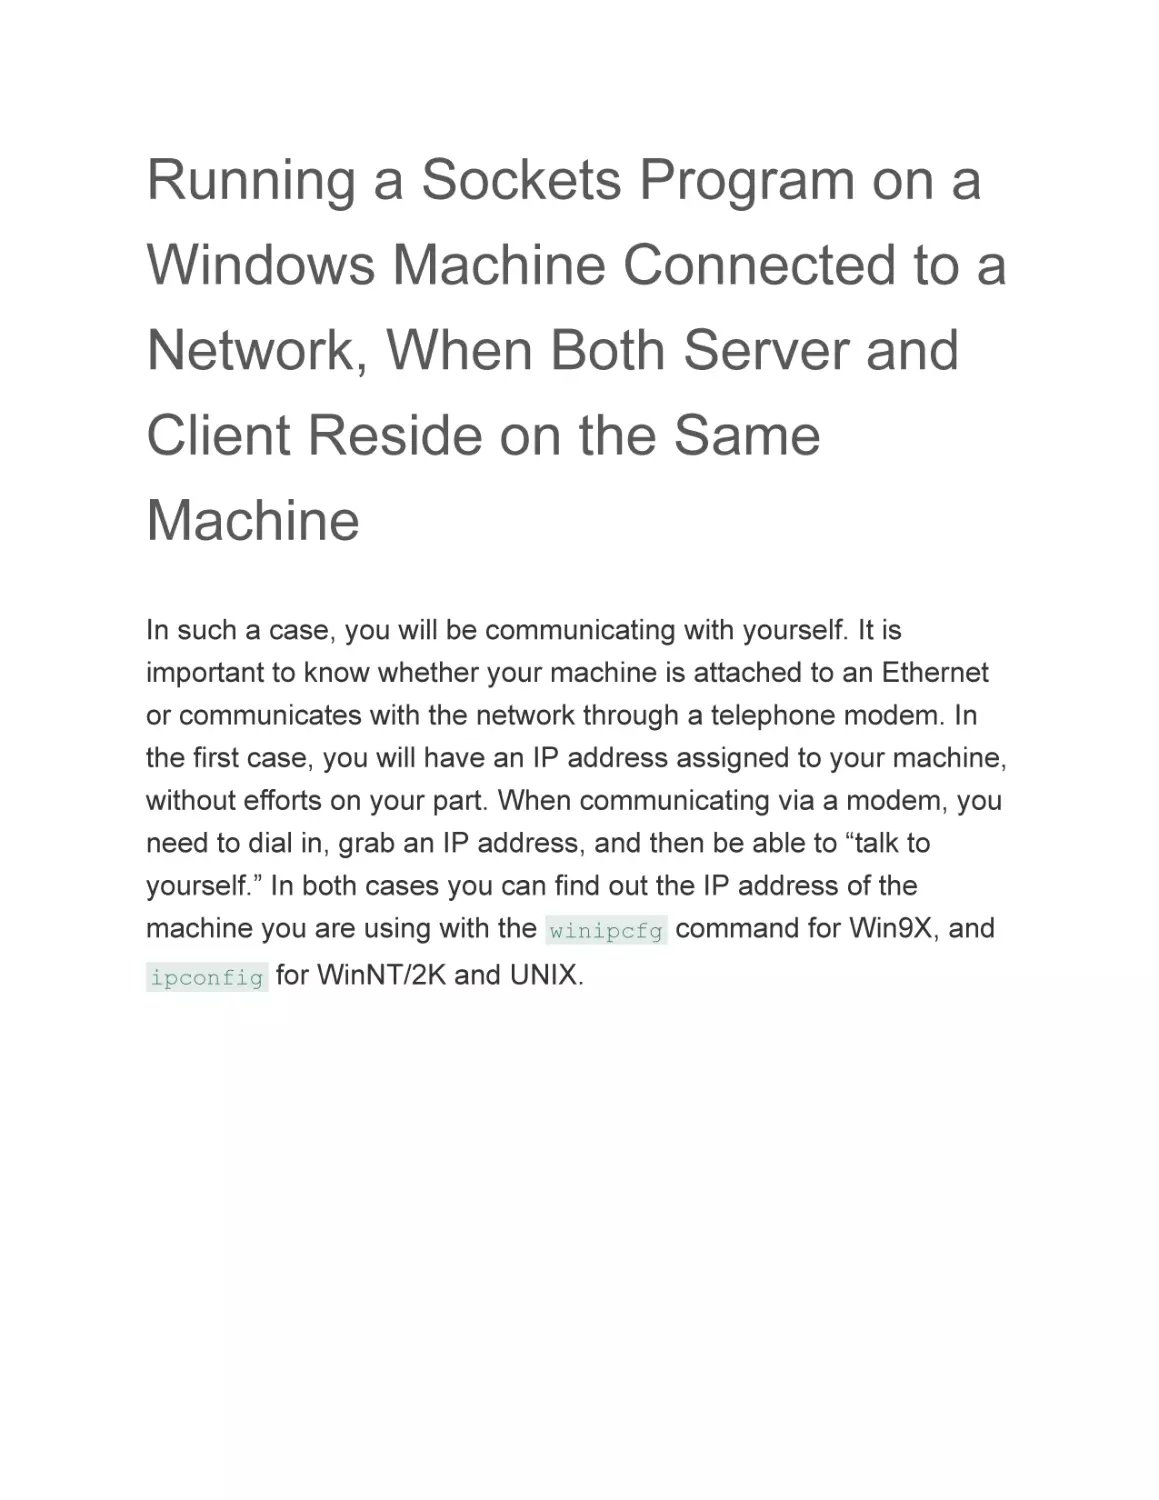 Running a Sockets Program on a Windows Machine Connected to a Network, When Both Server and Client Reside on the Same Machine